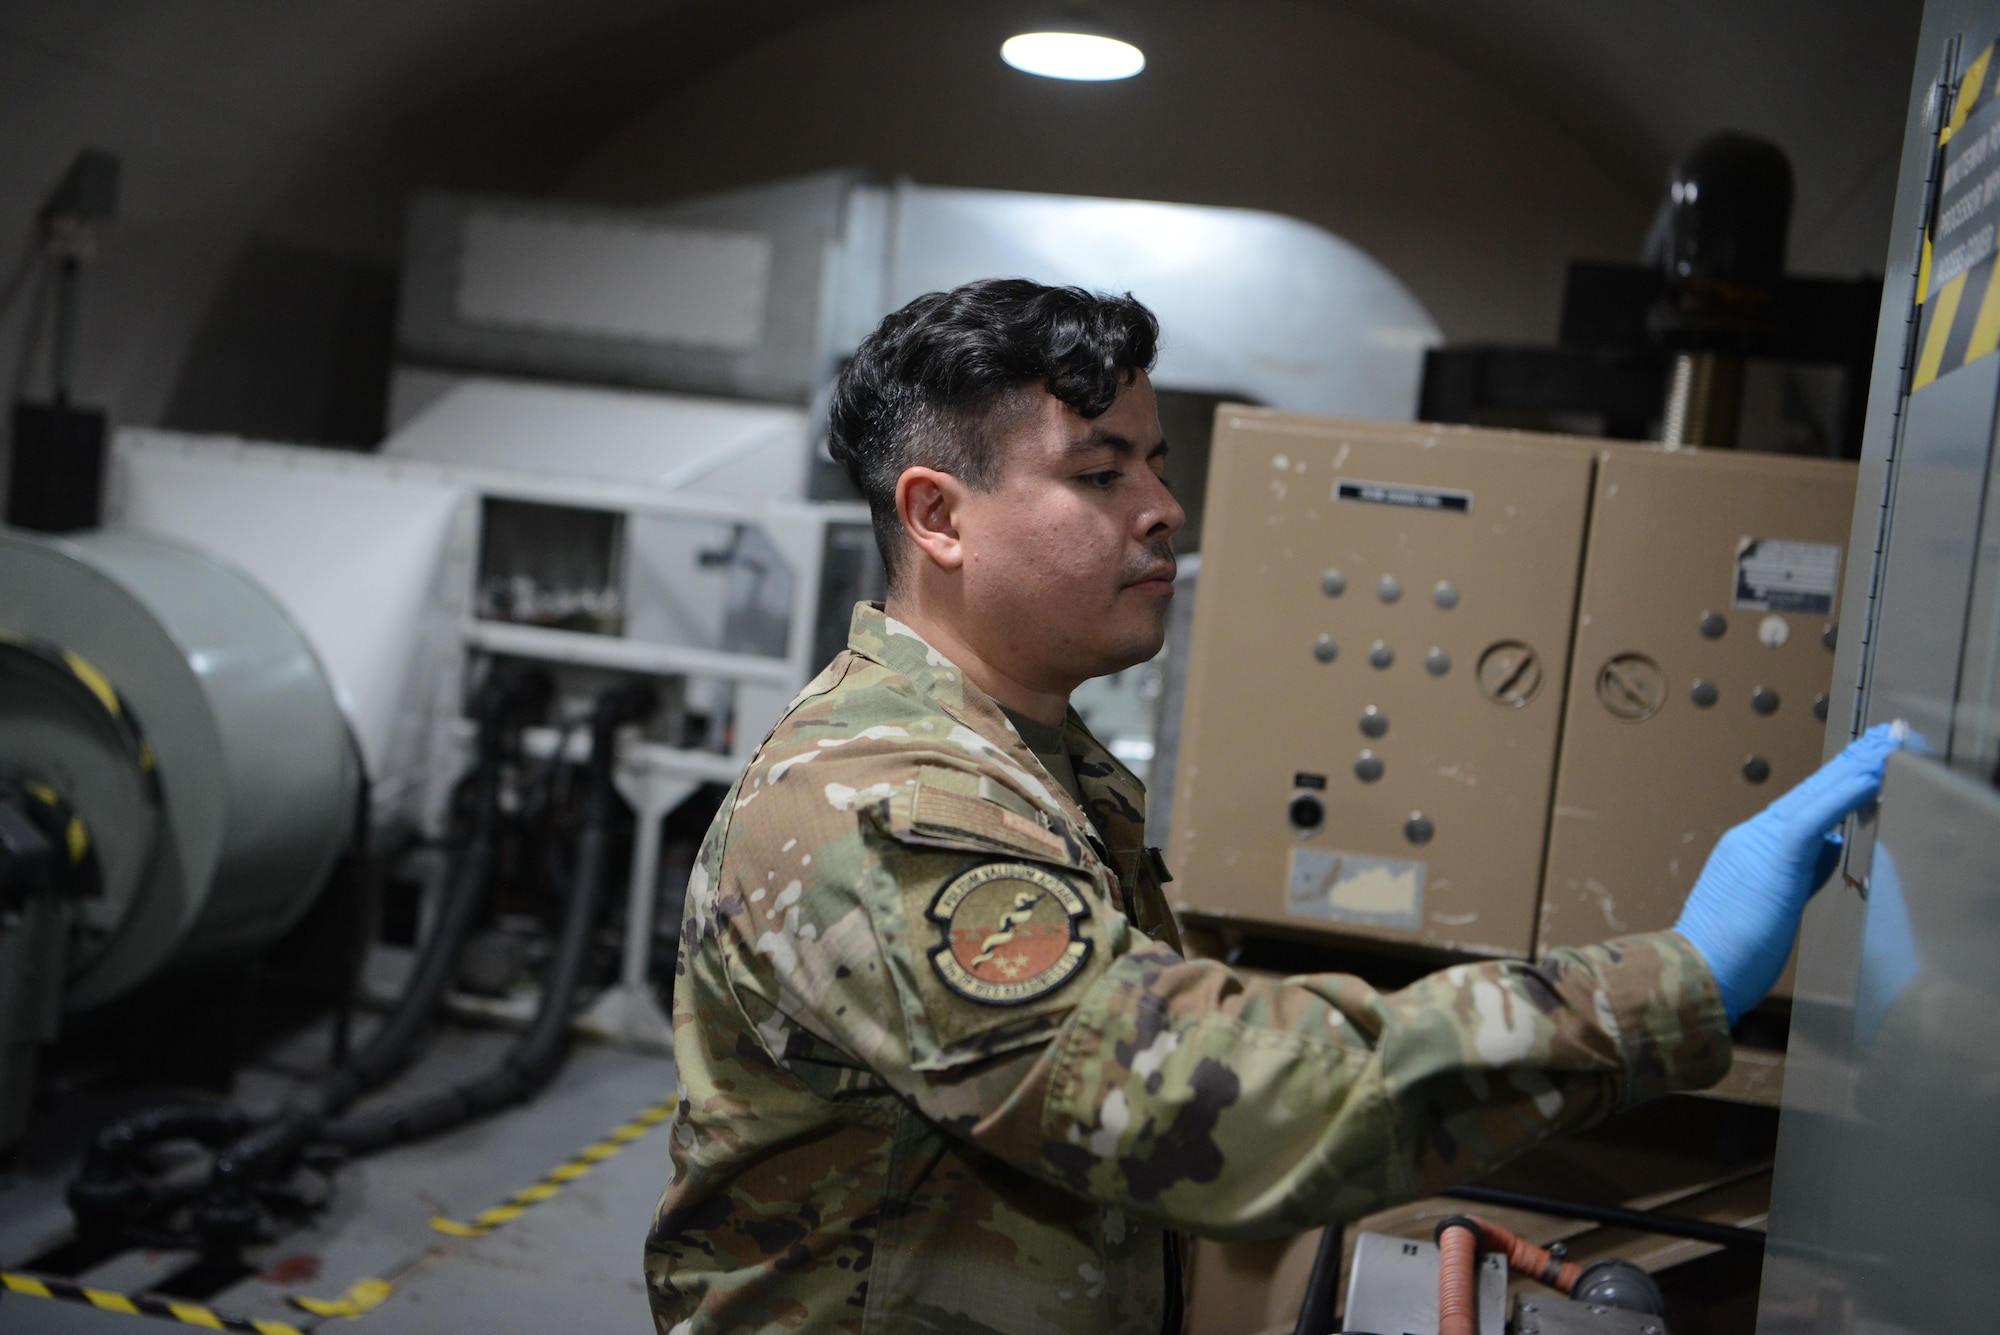 U.S. Air Force Staff Sgt. Oscar Ruiz-Camacho, a 5th Operational Medical Readiness Squadron bioenvironmental engineering technician, swabs to collect data for a swipe sample at a missile alert facility (MAF), near Minot Air Force Base, North Dakota, July 25, 2023. Ruiz-Camacho collected a swipe sample to test for presence of polychlorinated biphenyls. Airmen from the 5th OMRS conducted these tests as part of the ongoing “Missile Community Cancer Study,” air, water and soil quality will be tested at all the missile alert facilities within Air Force Global Strike Command’s three operational intercontinental ballistic missile wings for potential occupational hazards. USAFSAM is part of the Air Force Research Laboratory’s 711th Human Performance Wing.